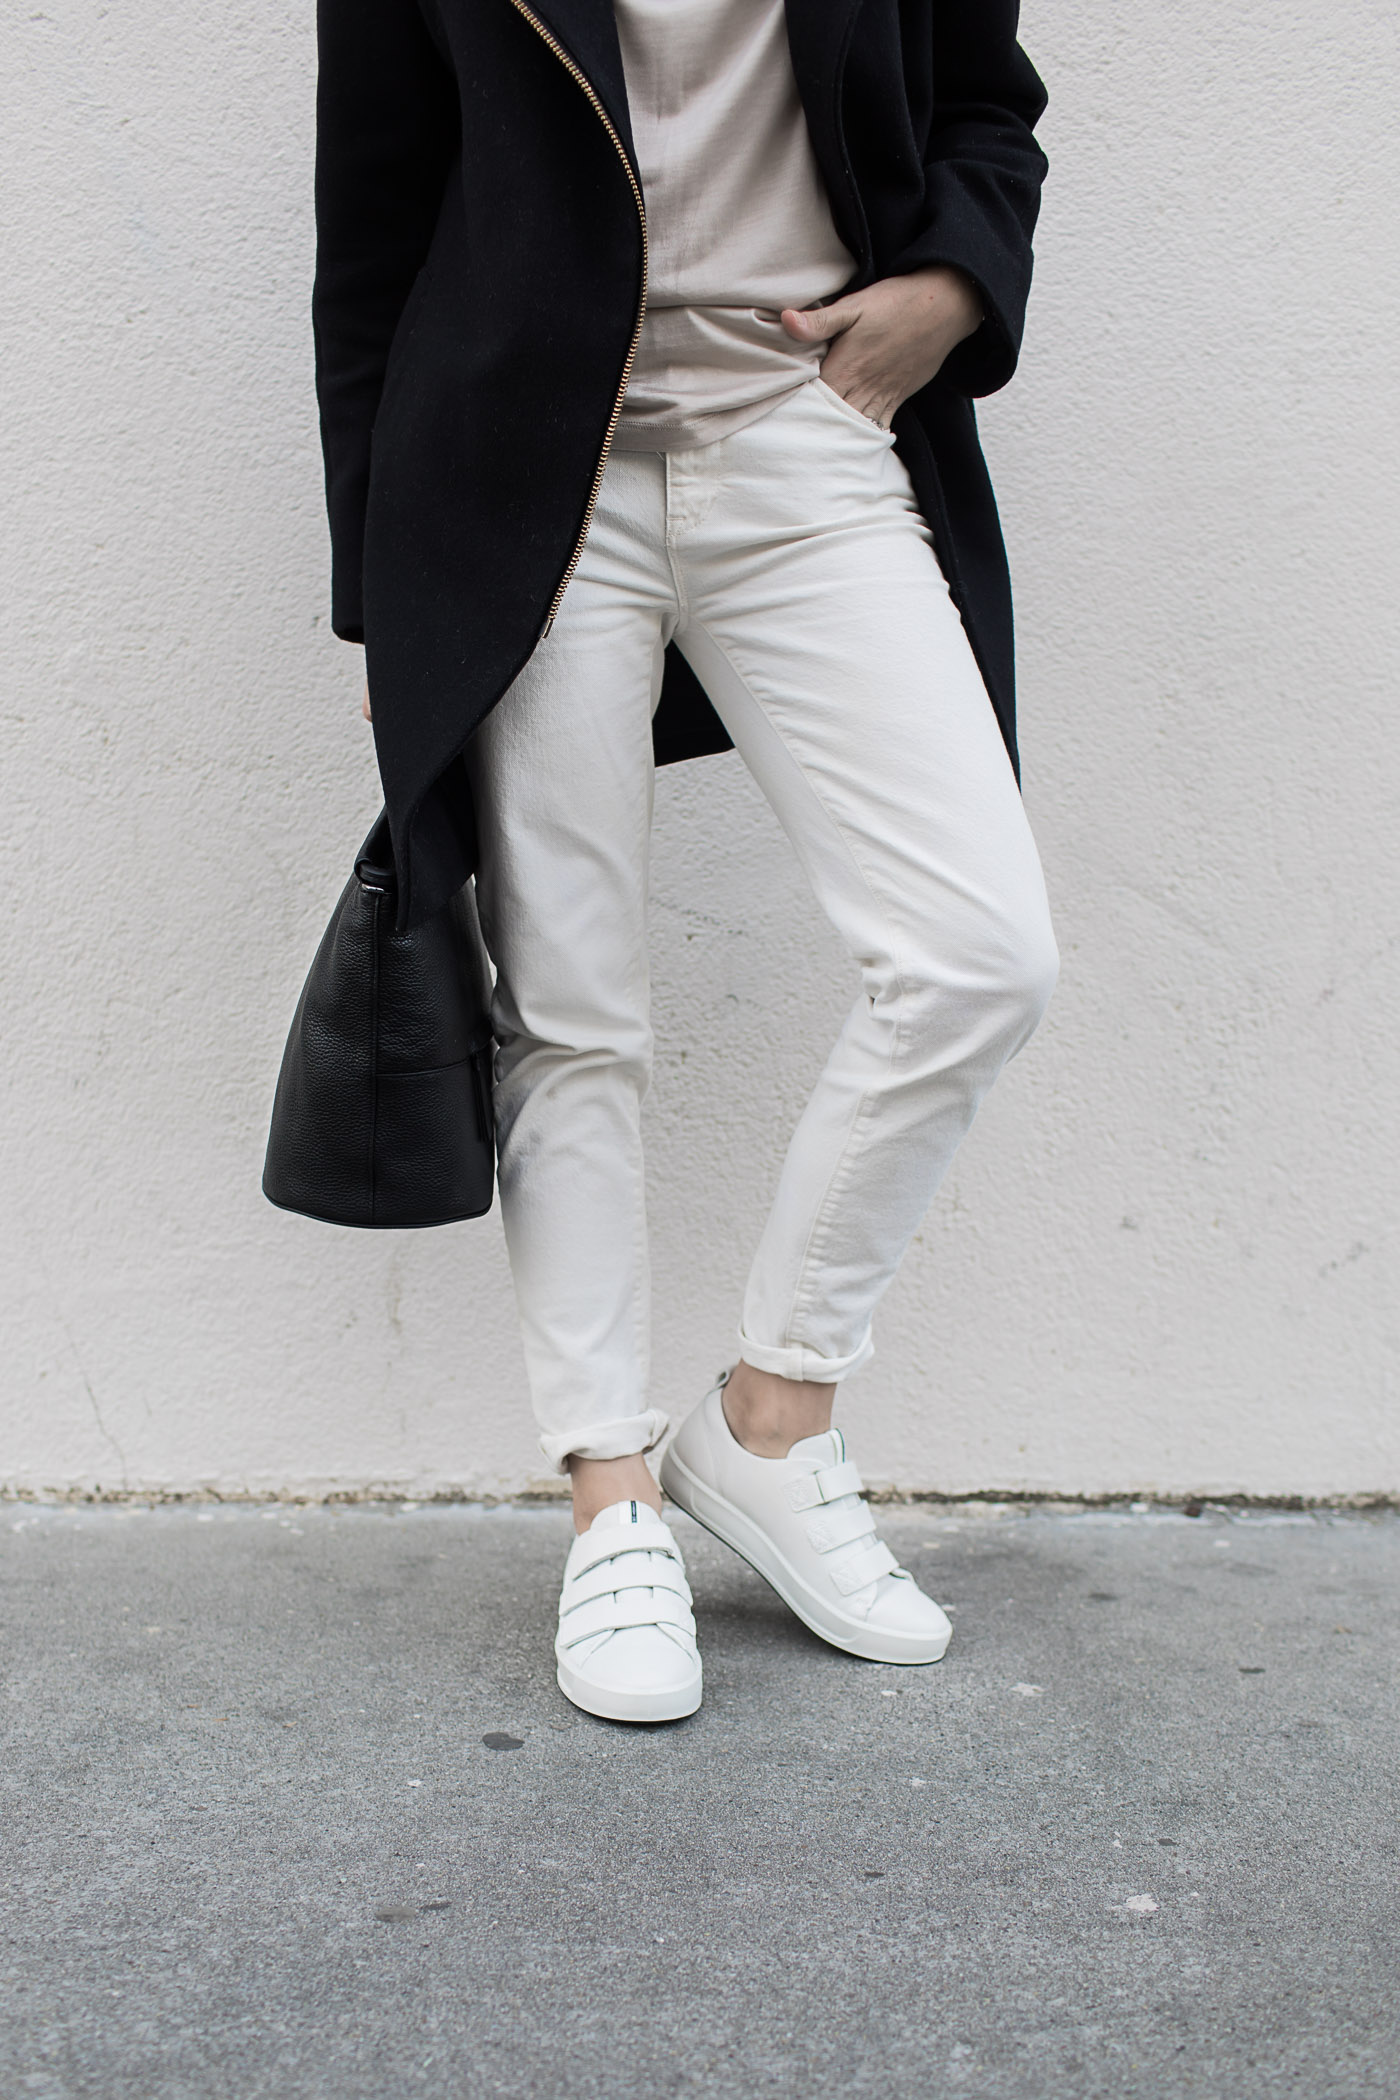 3 Ways to Wear White Sneakers